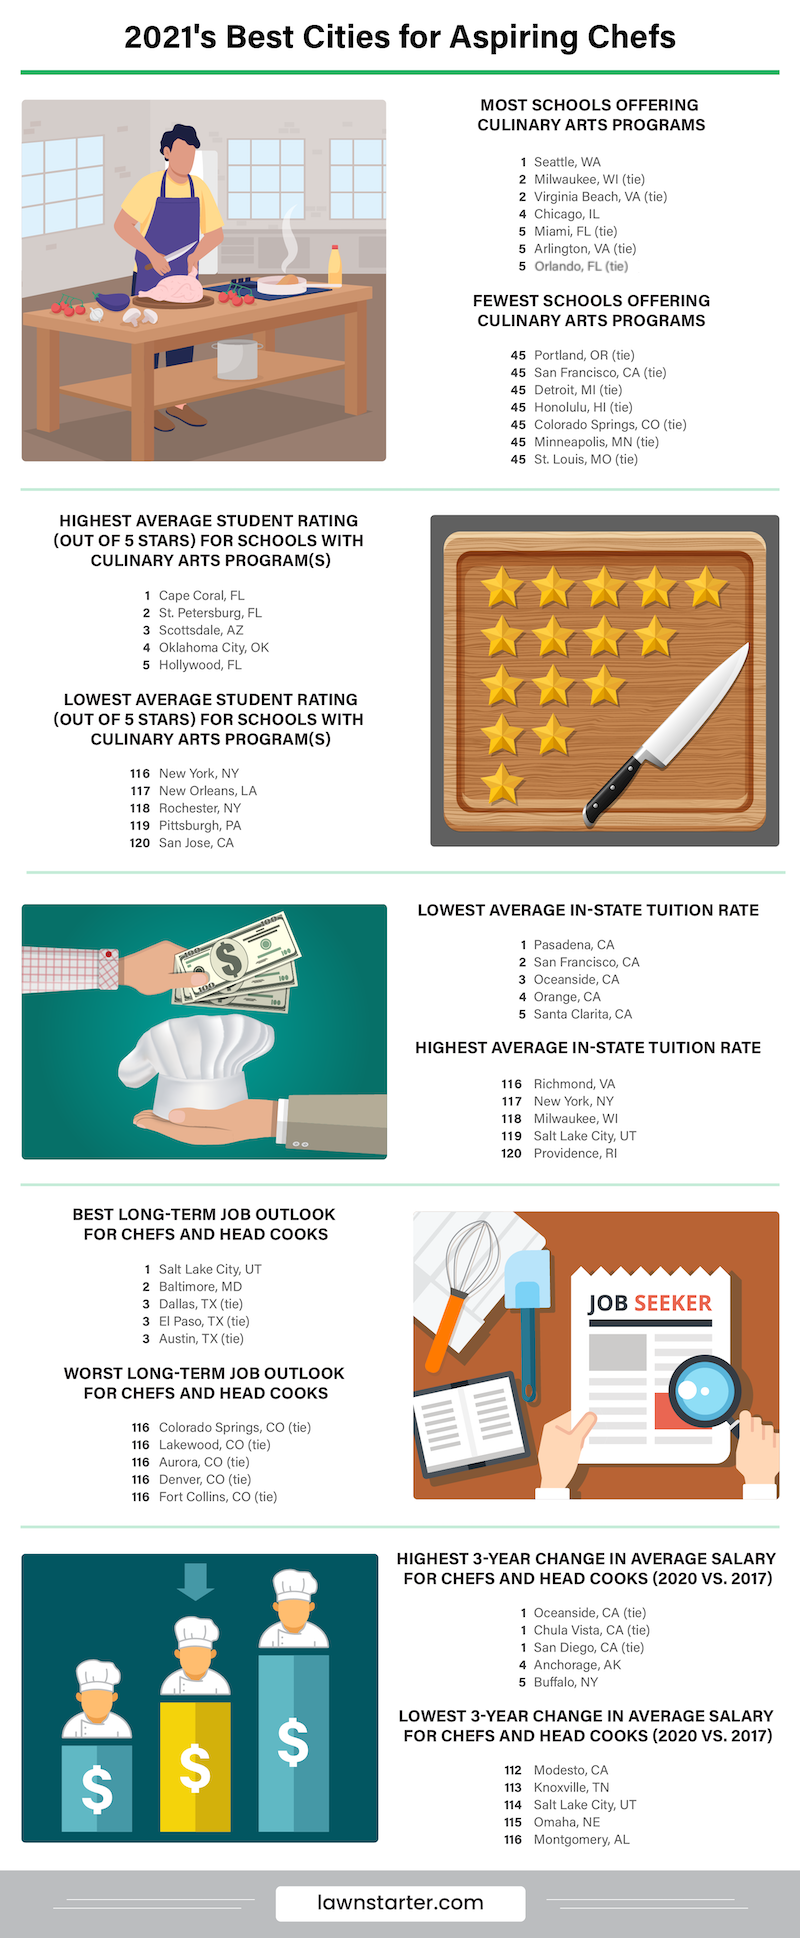 Infographic showing the best cities for aspiring chefs, a ranking based on access to culinary programs, student ratings, job outlook, and more